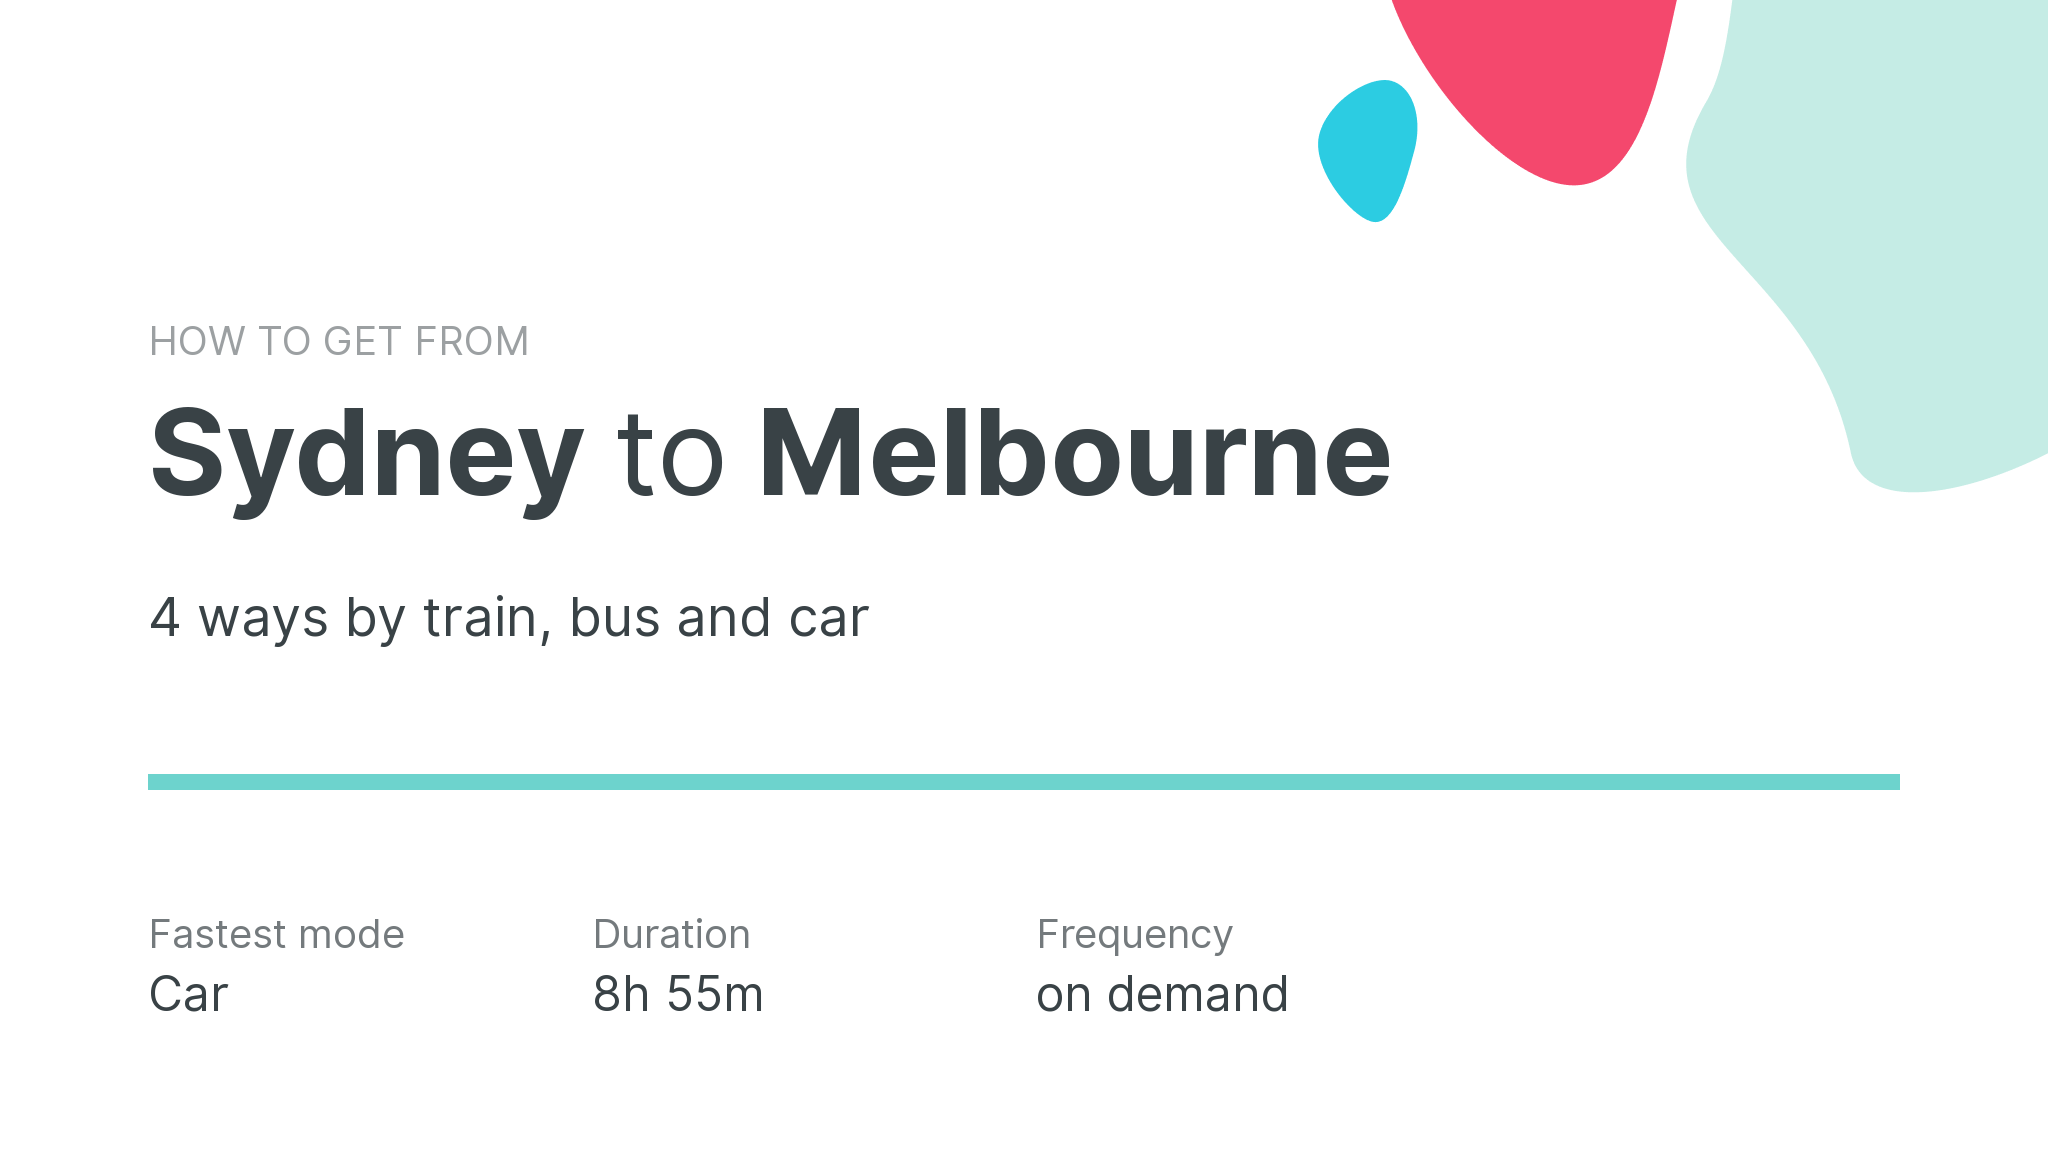 How do I get from Sydney to Melbourne